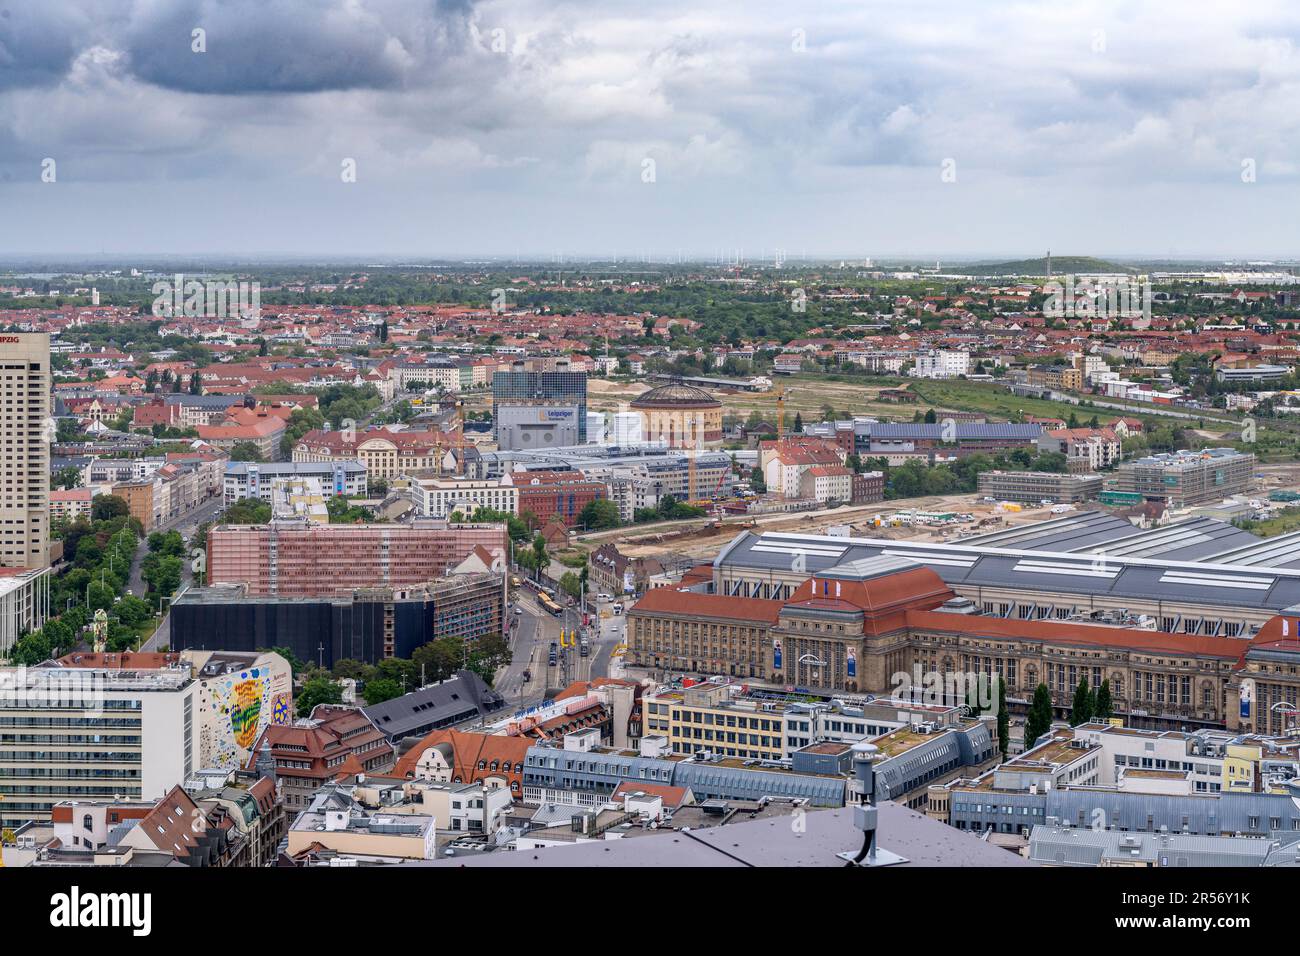 Aerial views from Leipzig's Panorama Tower. The city was badly bombed at the end of WWII so most of what you can see has been rebuilt since then. Stock Photo